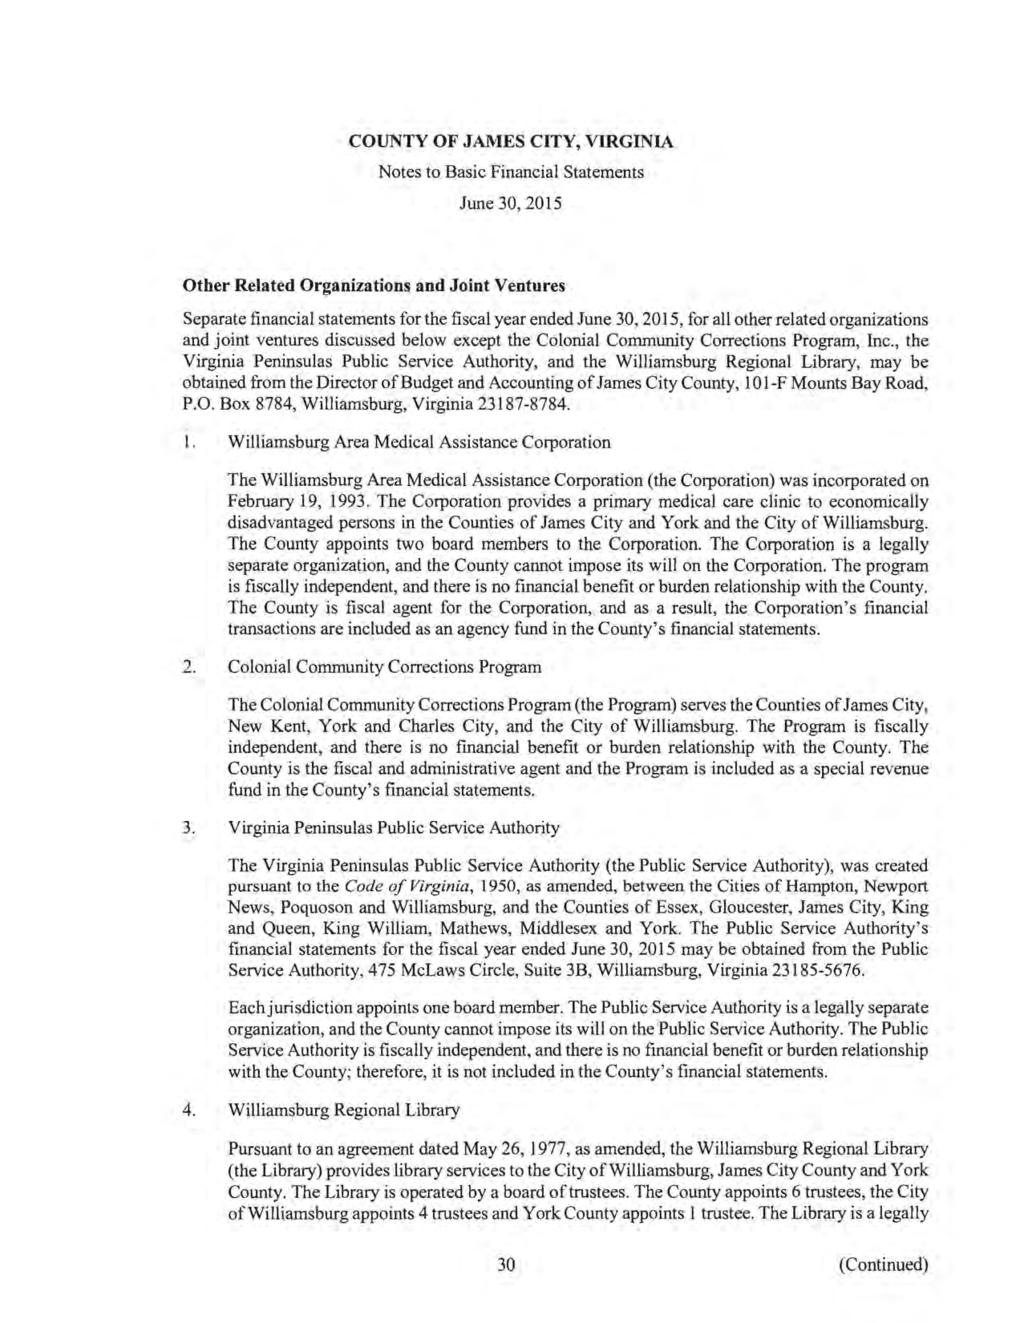 COUNTY OF JAMES CITY, VIRGINIA Notes to Basic Financial Statements June 30, 2015 Other Related Organizations and Joint Ventures Separate financial statements for the fiscal year ended June 30, 2015,